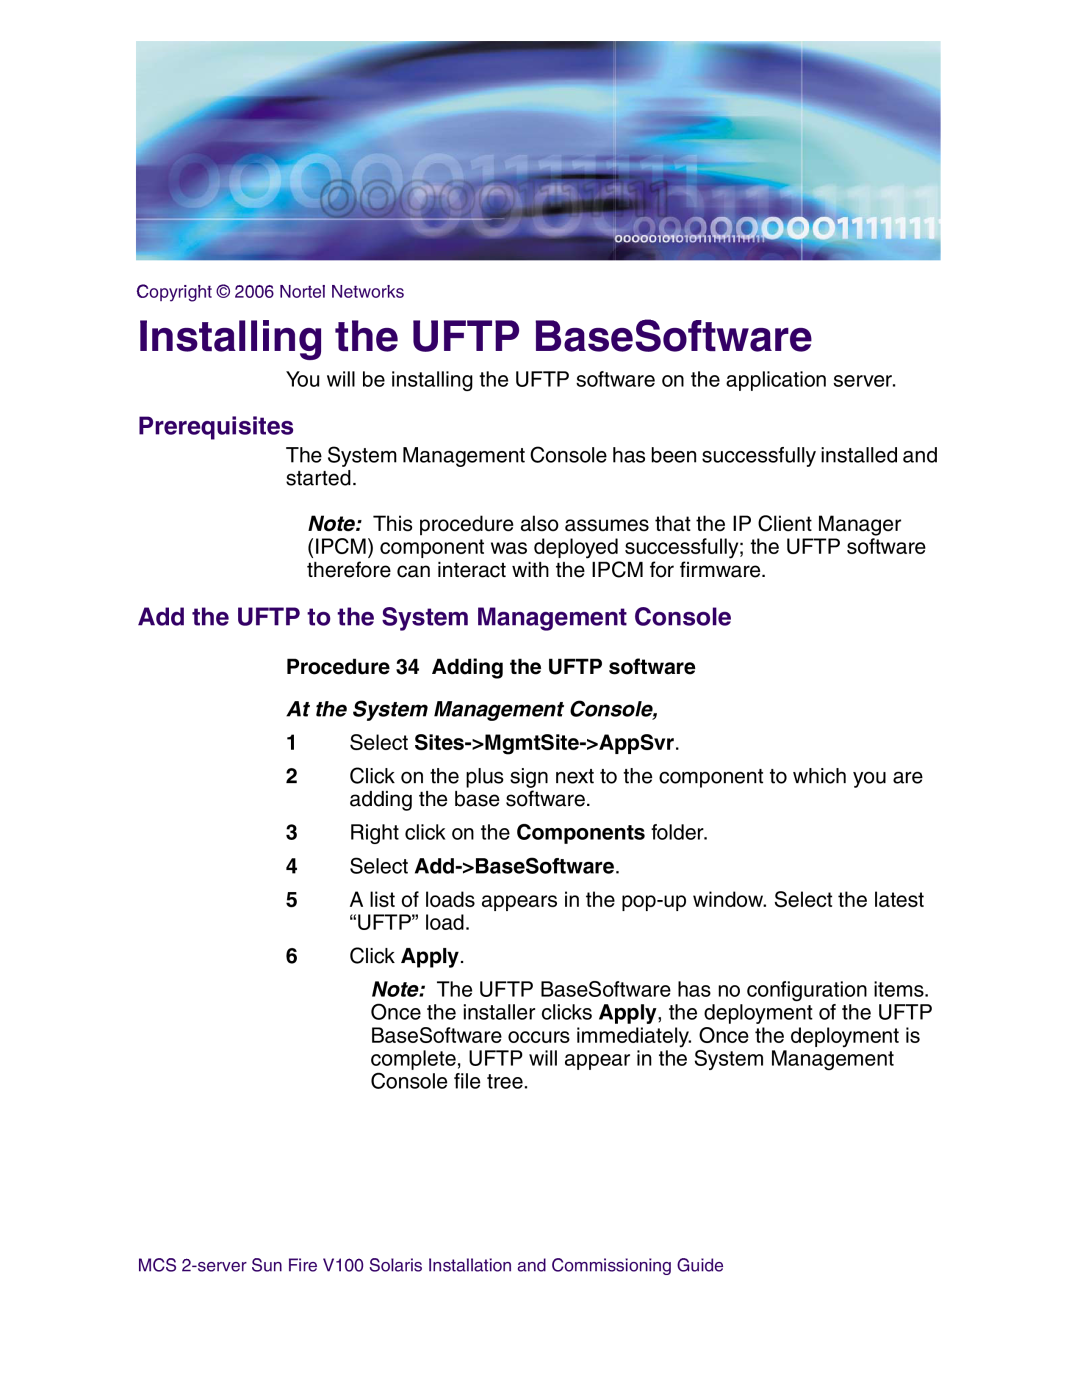 Nortel Networks V100 manual Installing the UFTP BaseSoftware, Add the UFTP to the System Management Console, Prerequisites 